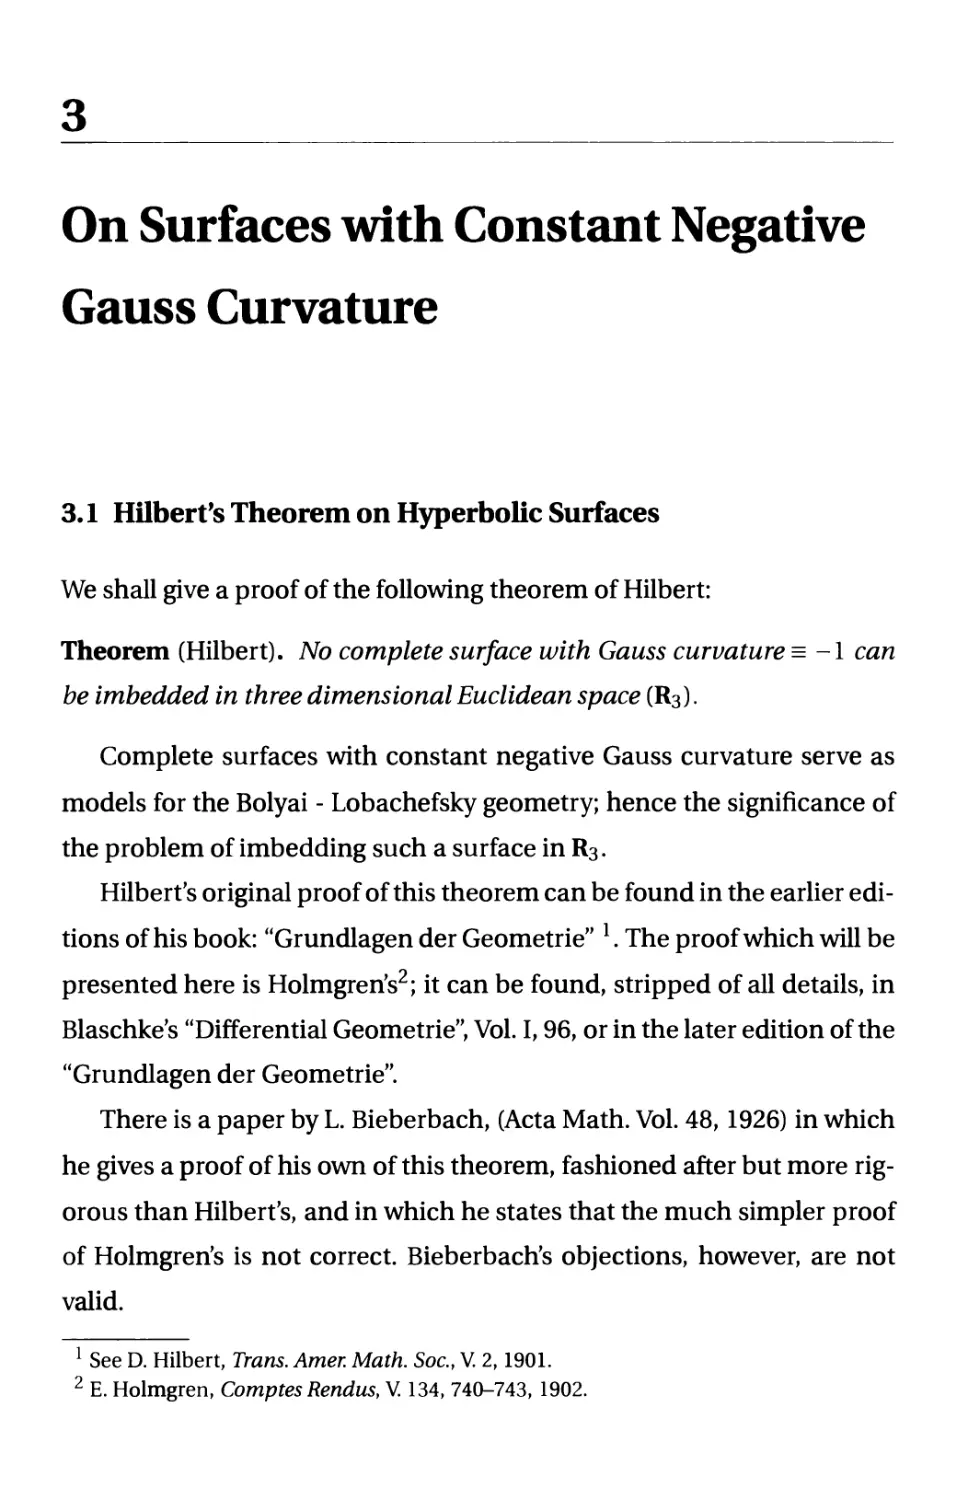 3. On Surfaces with Constant Negative Gauss Curvature
3.1 Hilbert's Theorem on Hyperbolic Surfaces